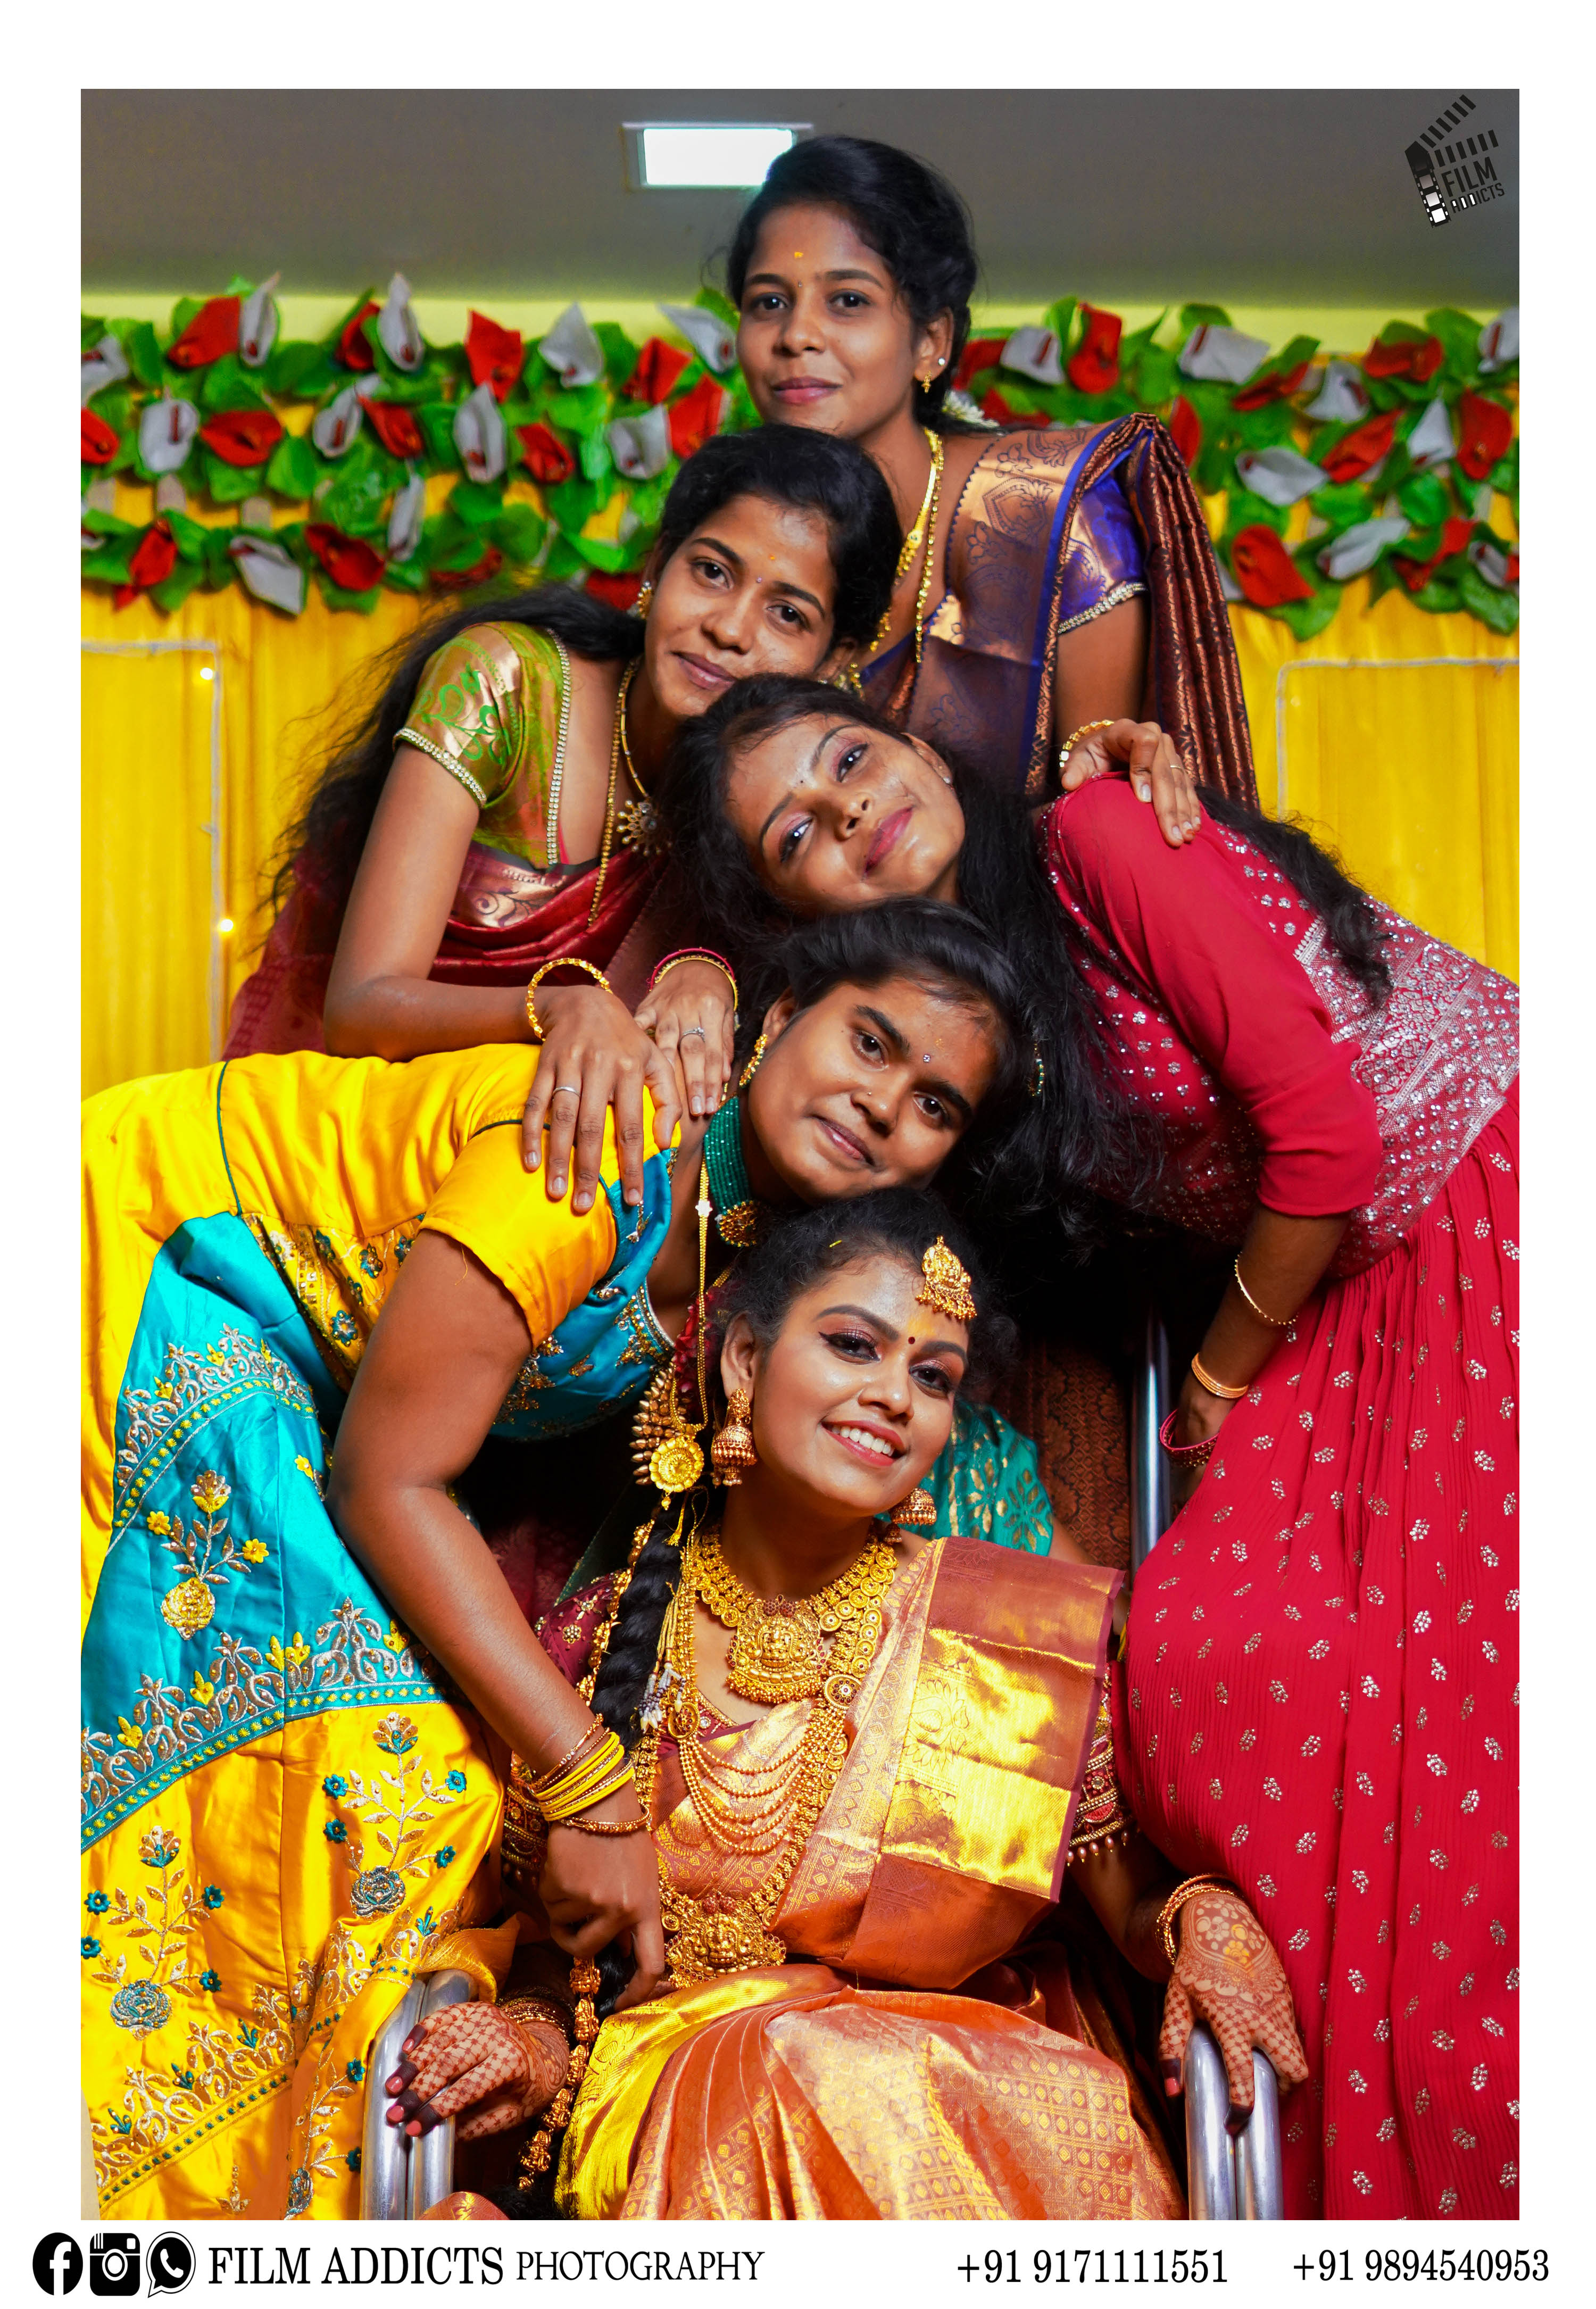 Best Puberty Photography in Madurai-FilmAddicts Photography, Best Wedding Candid photographers in Theni,  Wedding Candid Moments FilmAddicts, Photography FilmAddictsPhotography, best wedding in Theni, Best Candid-shoot in Theni, best moment, Best wedding moments, Best wedding photography in Theni, Best wedding videography in Theni, Best couple shoot, Best candid, Best wedding shoot,  best marriage photographers in Theni, best marriage photography in Theni, best candid photography, best Theni photography, Theni photography, Theni couples, candid shoot, candid , tamilnadu wedding photography, best photographers in Theni, tamilnadu.